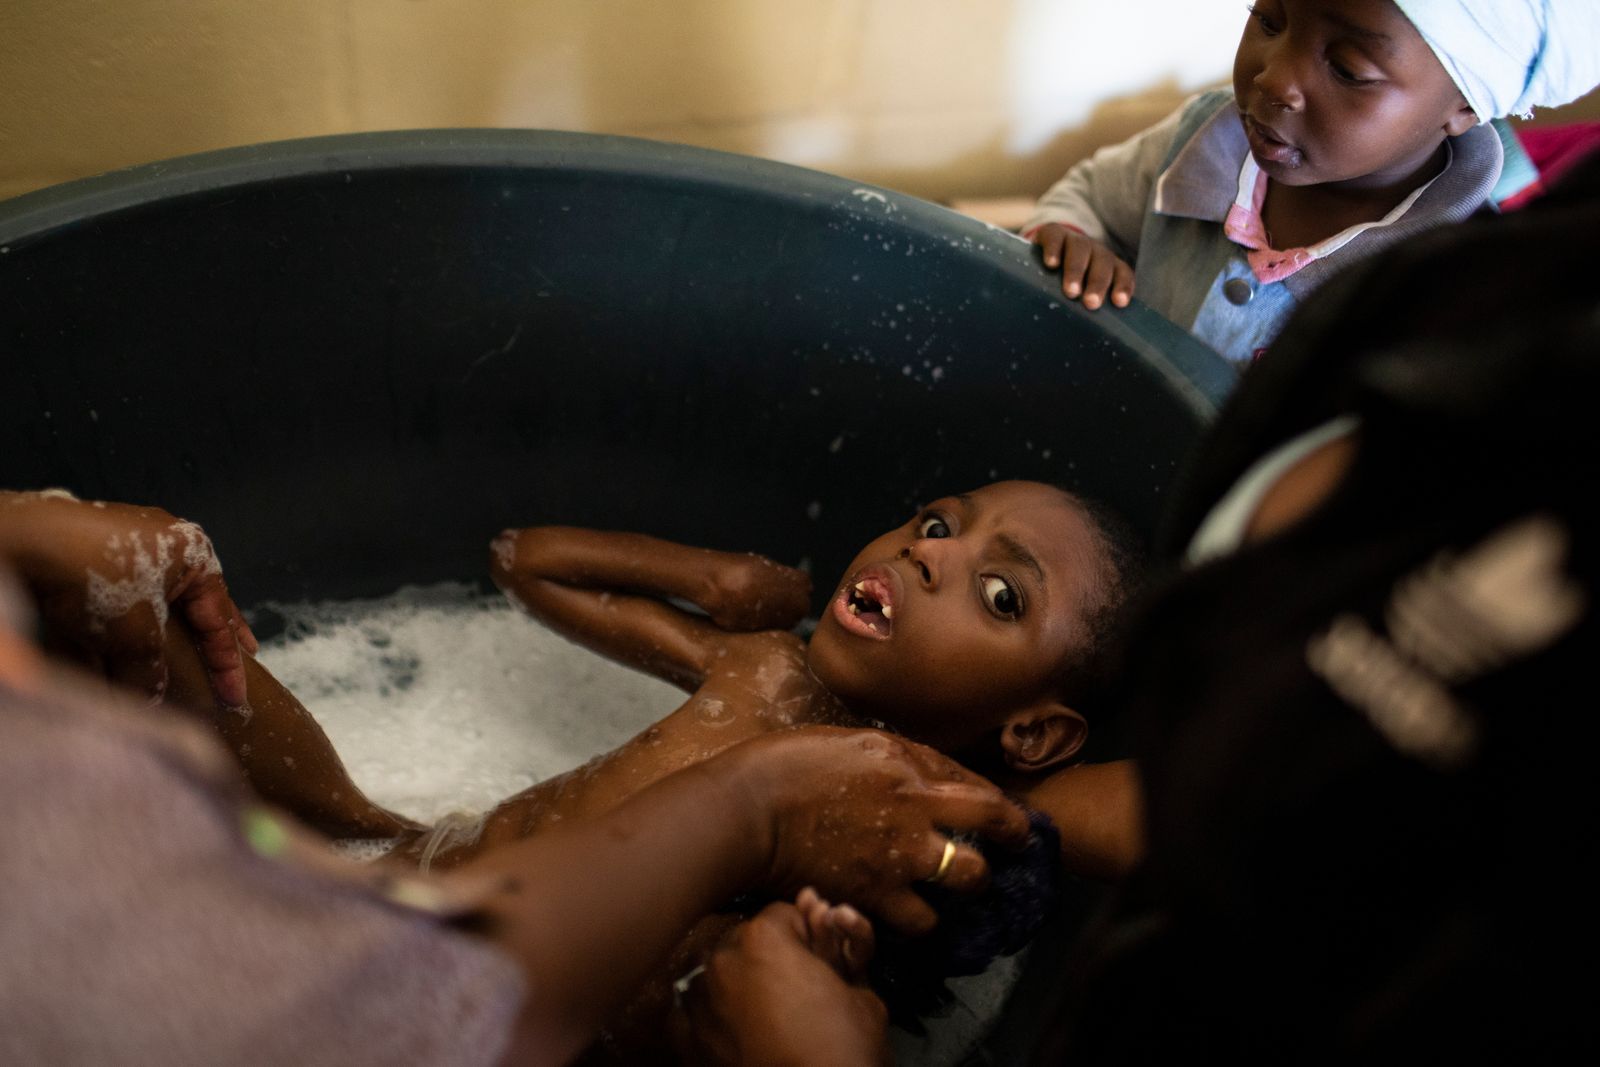 © Ilvy Njiokiktjien - Efewe (6), taking a bath with the help from his mother and grandmother in Samora Machel, a township close to Cape Town.